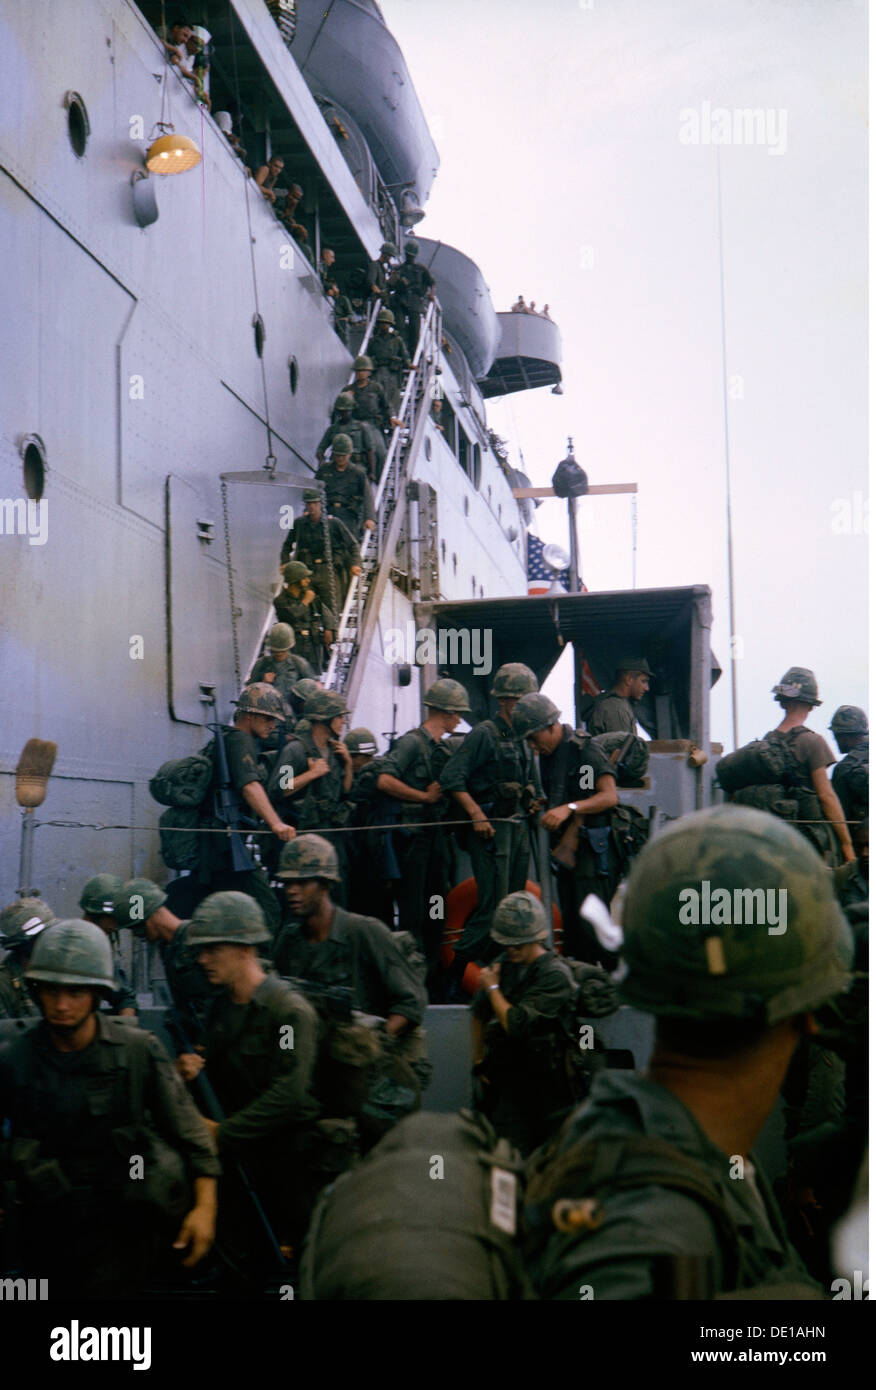 Vietnam War 1957 - 1975, arrival of American soldiers, changing into a landing craft, South Vietnam, 1965, harbour, harbor, harbours, harbors, port, ports, transport ship, transport ships, boat, boats, military, armed forces, army, armies, USA, United States of America, South-East Asia, South East Asia, Southeast Asia, Far East, Viet Nam conflict, Viet Nam, Vietnam, war, wars, conflict, conflicts, 1960s, 60s, 20th century, people, men, man, male, soldiers, soldier, landing craft, landing crafts, historic, historical, Additional-Rights-Clearences-Not Available Stock Photo